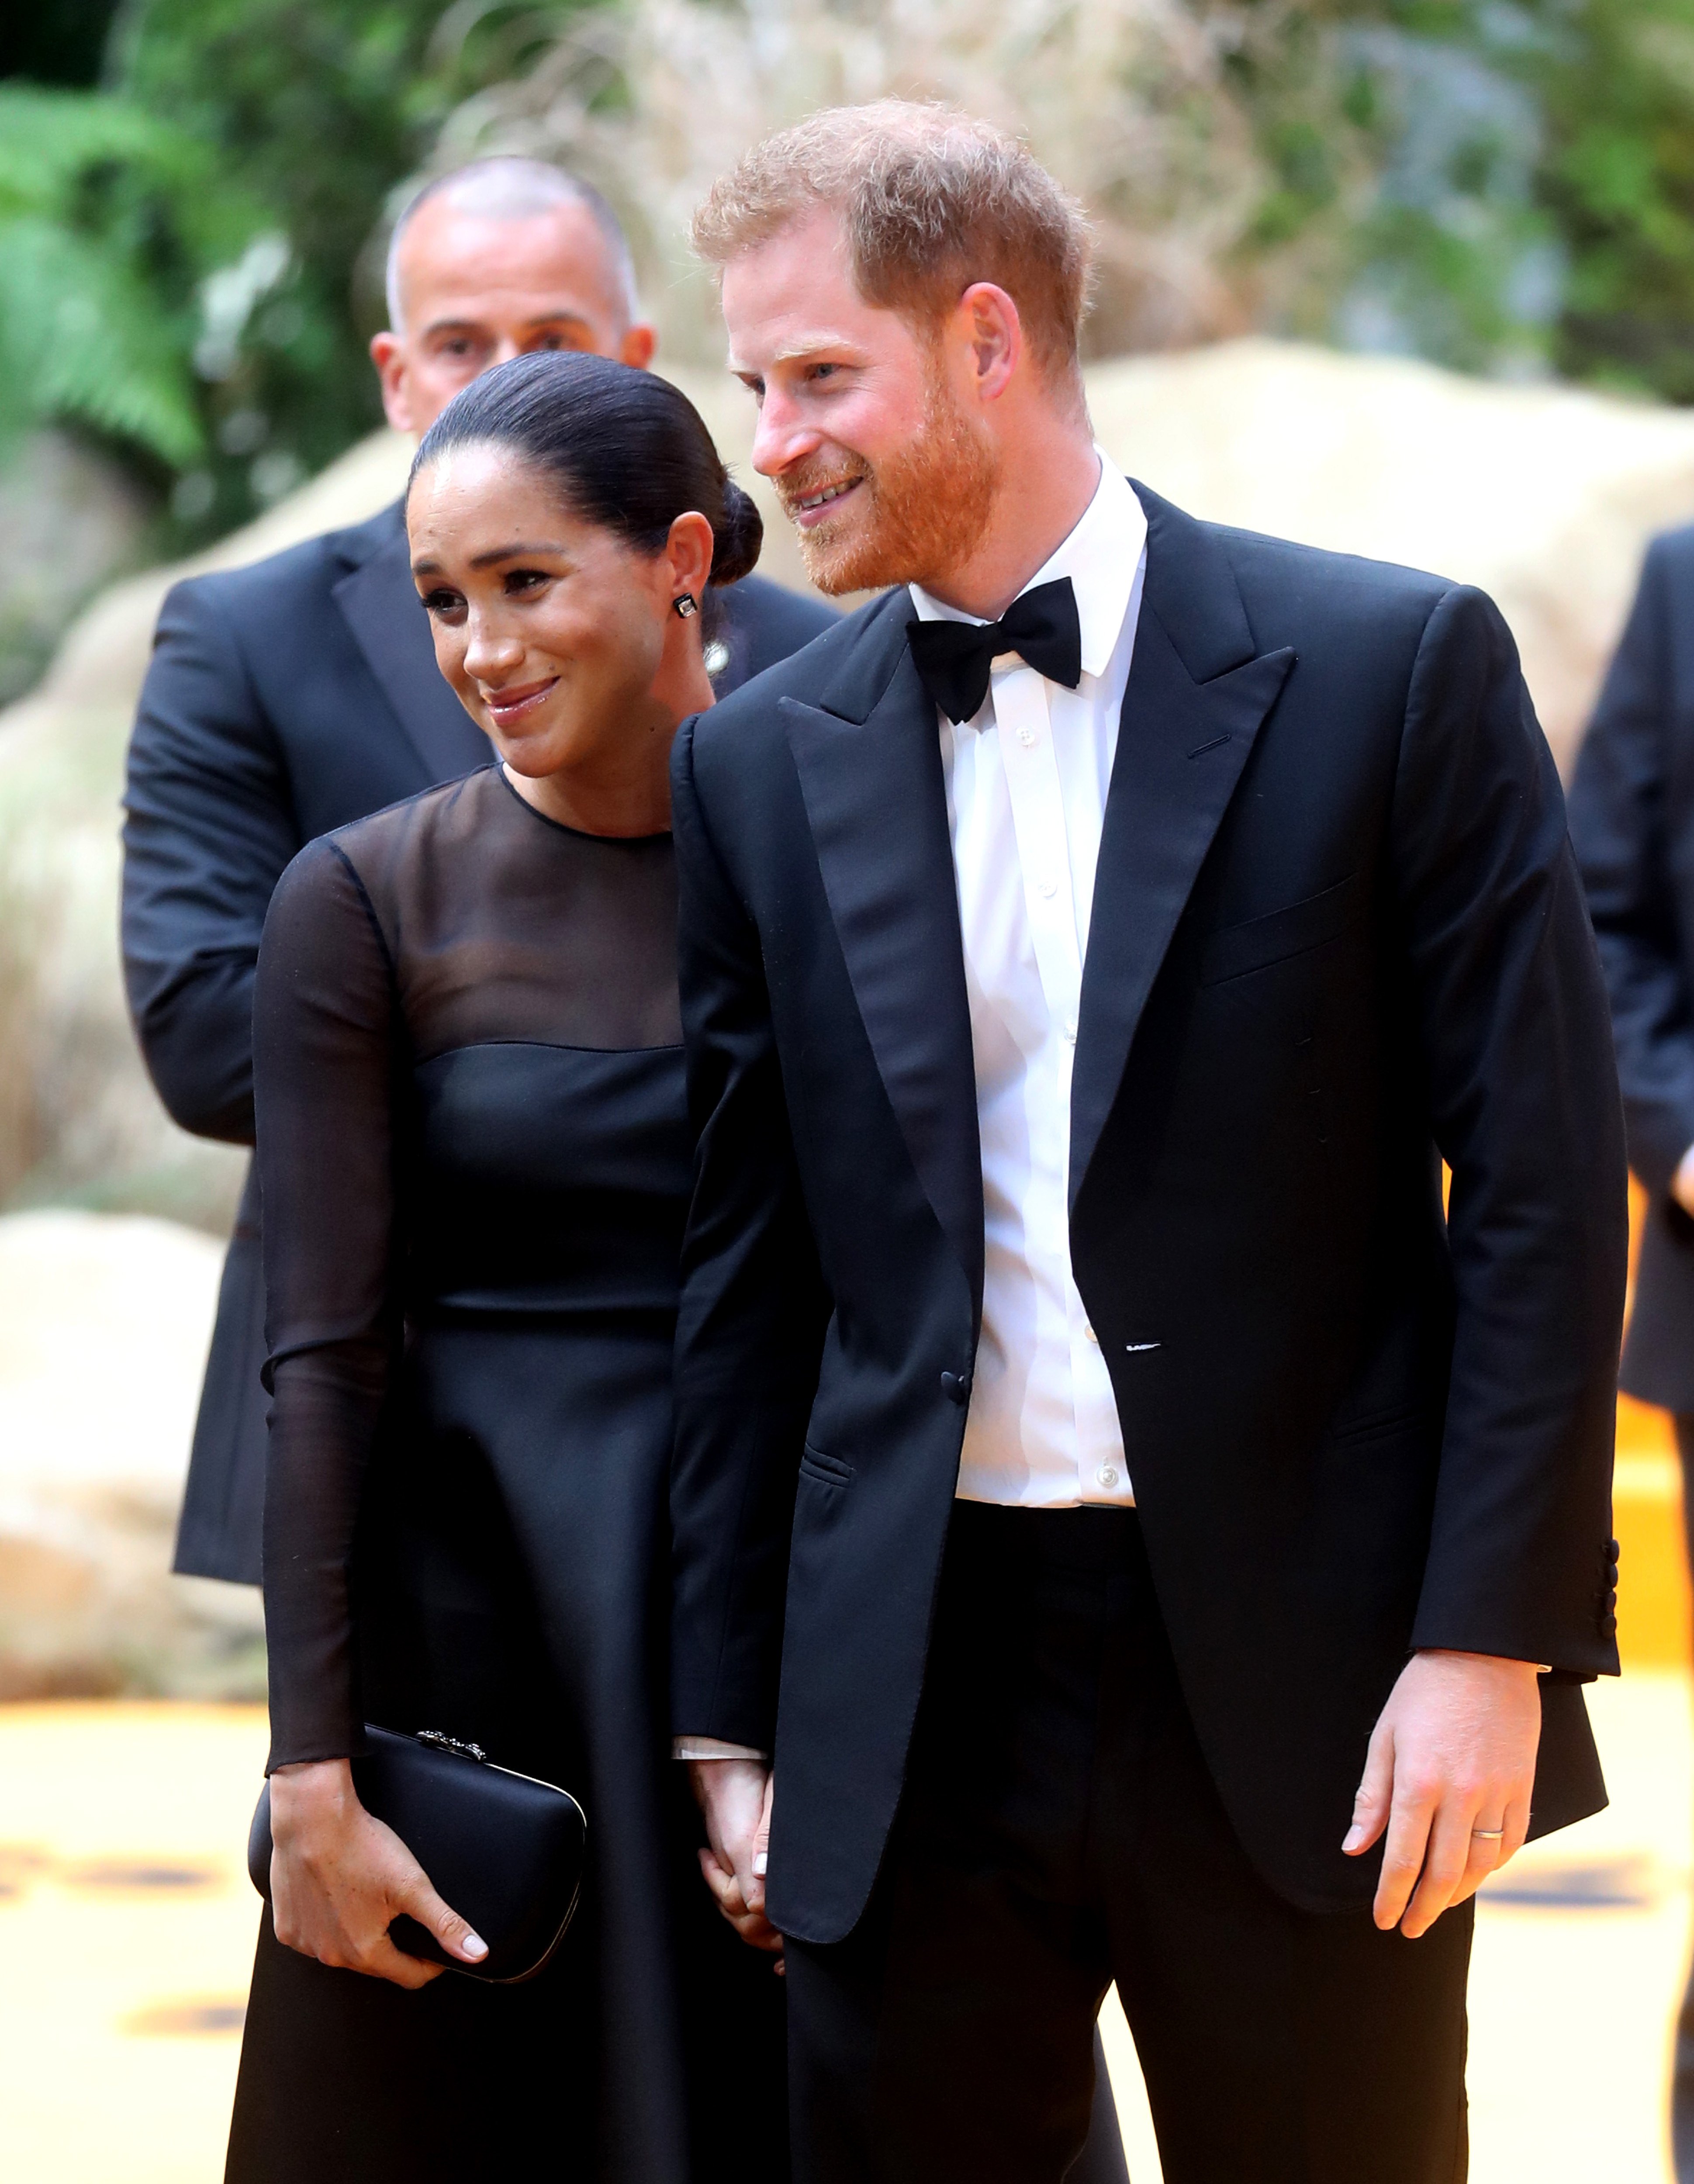 Meghan Markle and Prince Harry in London 2019. | Source: Getty Images